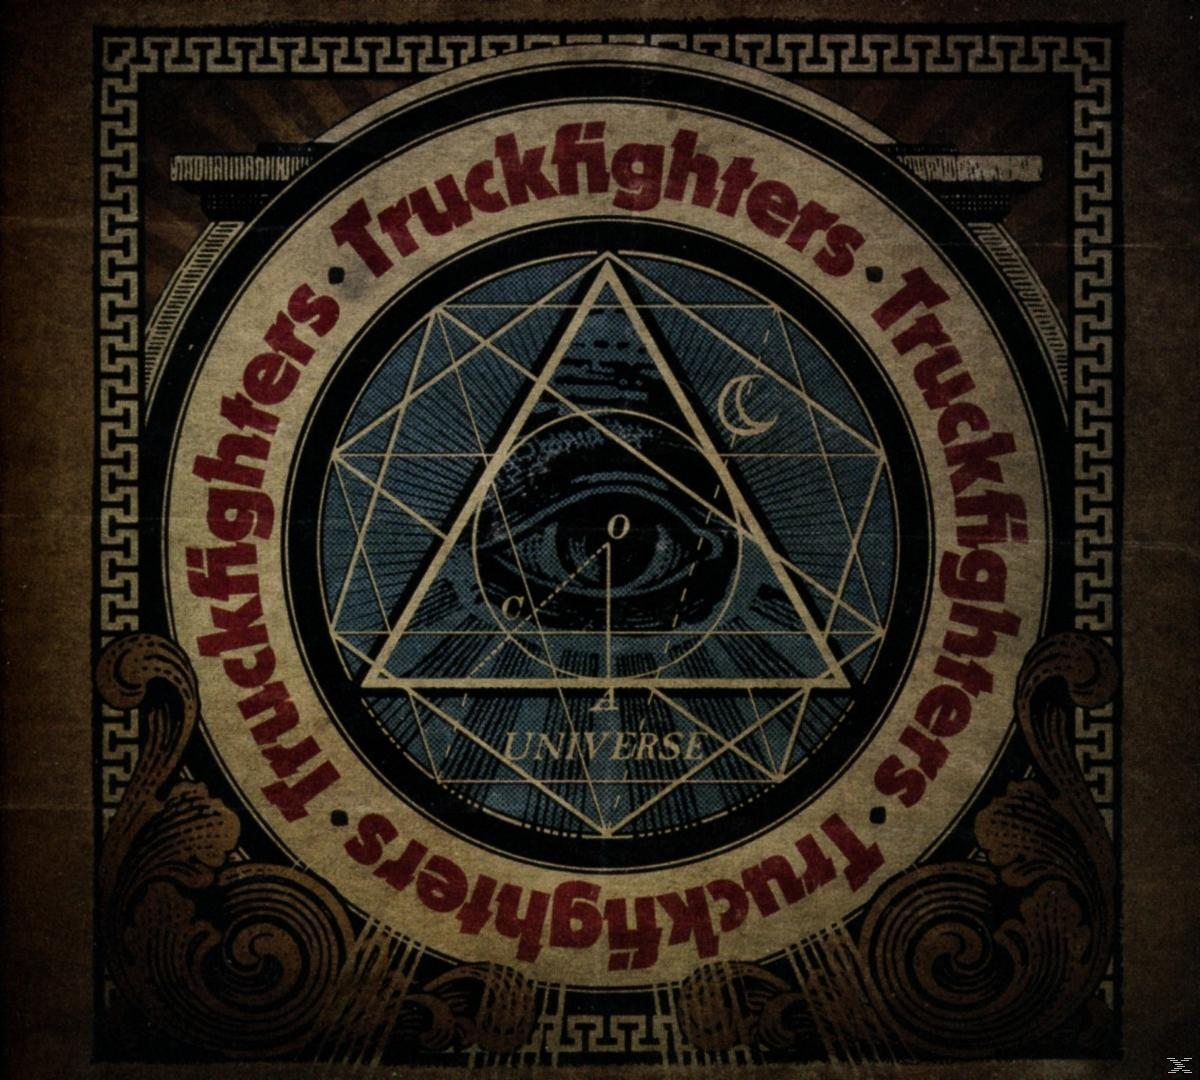 Truckfighters - (CD) Universe 